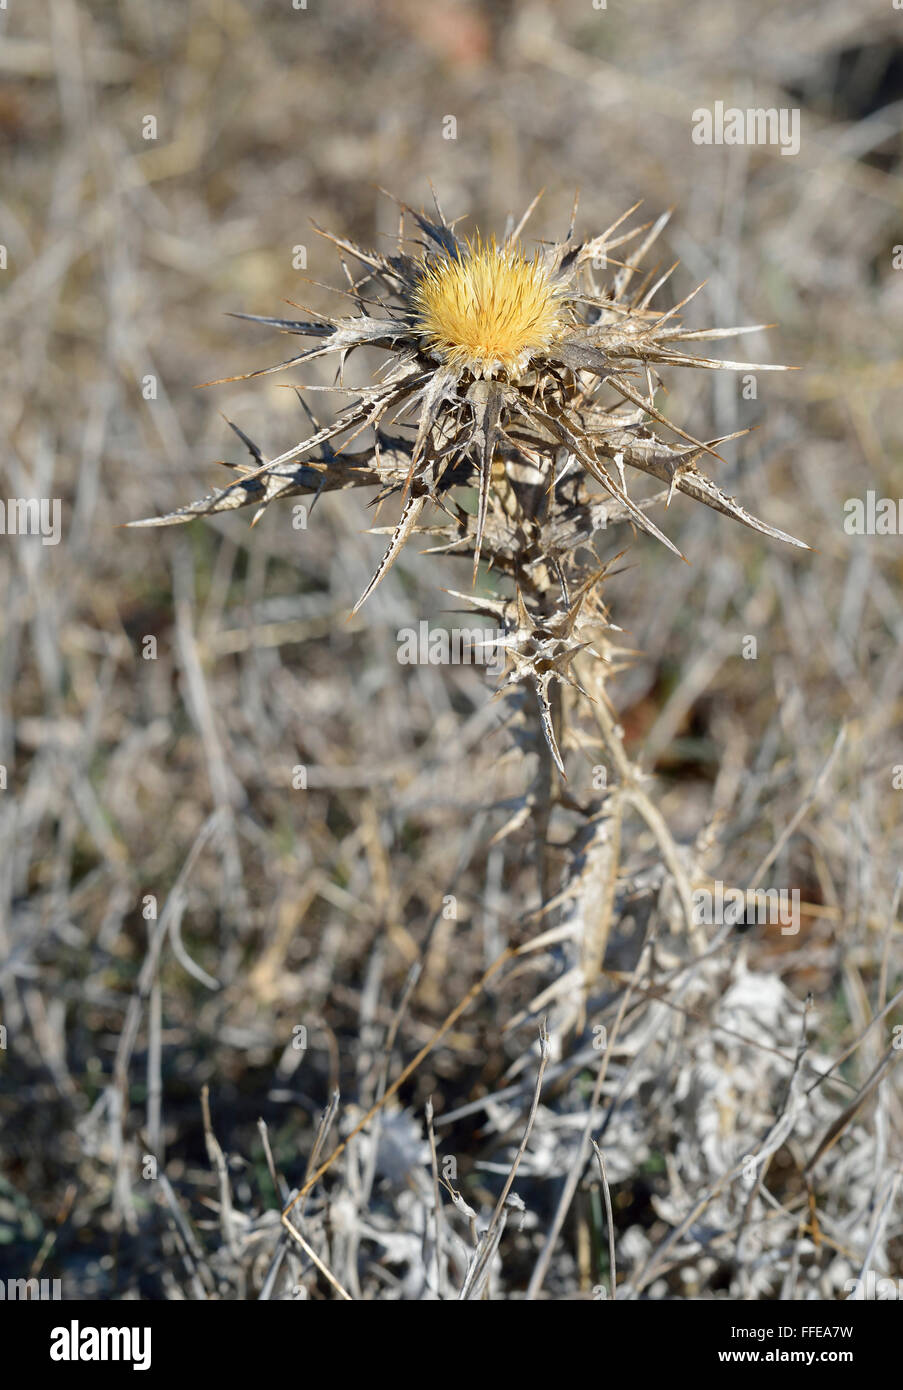 A Carline Thistle - Carlina libanotica From Cyprus Stock Photo